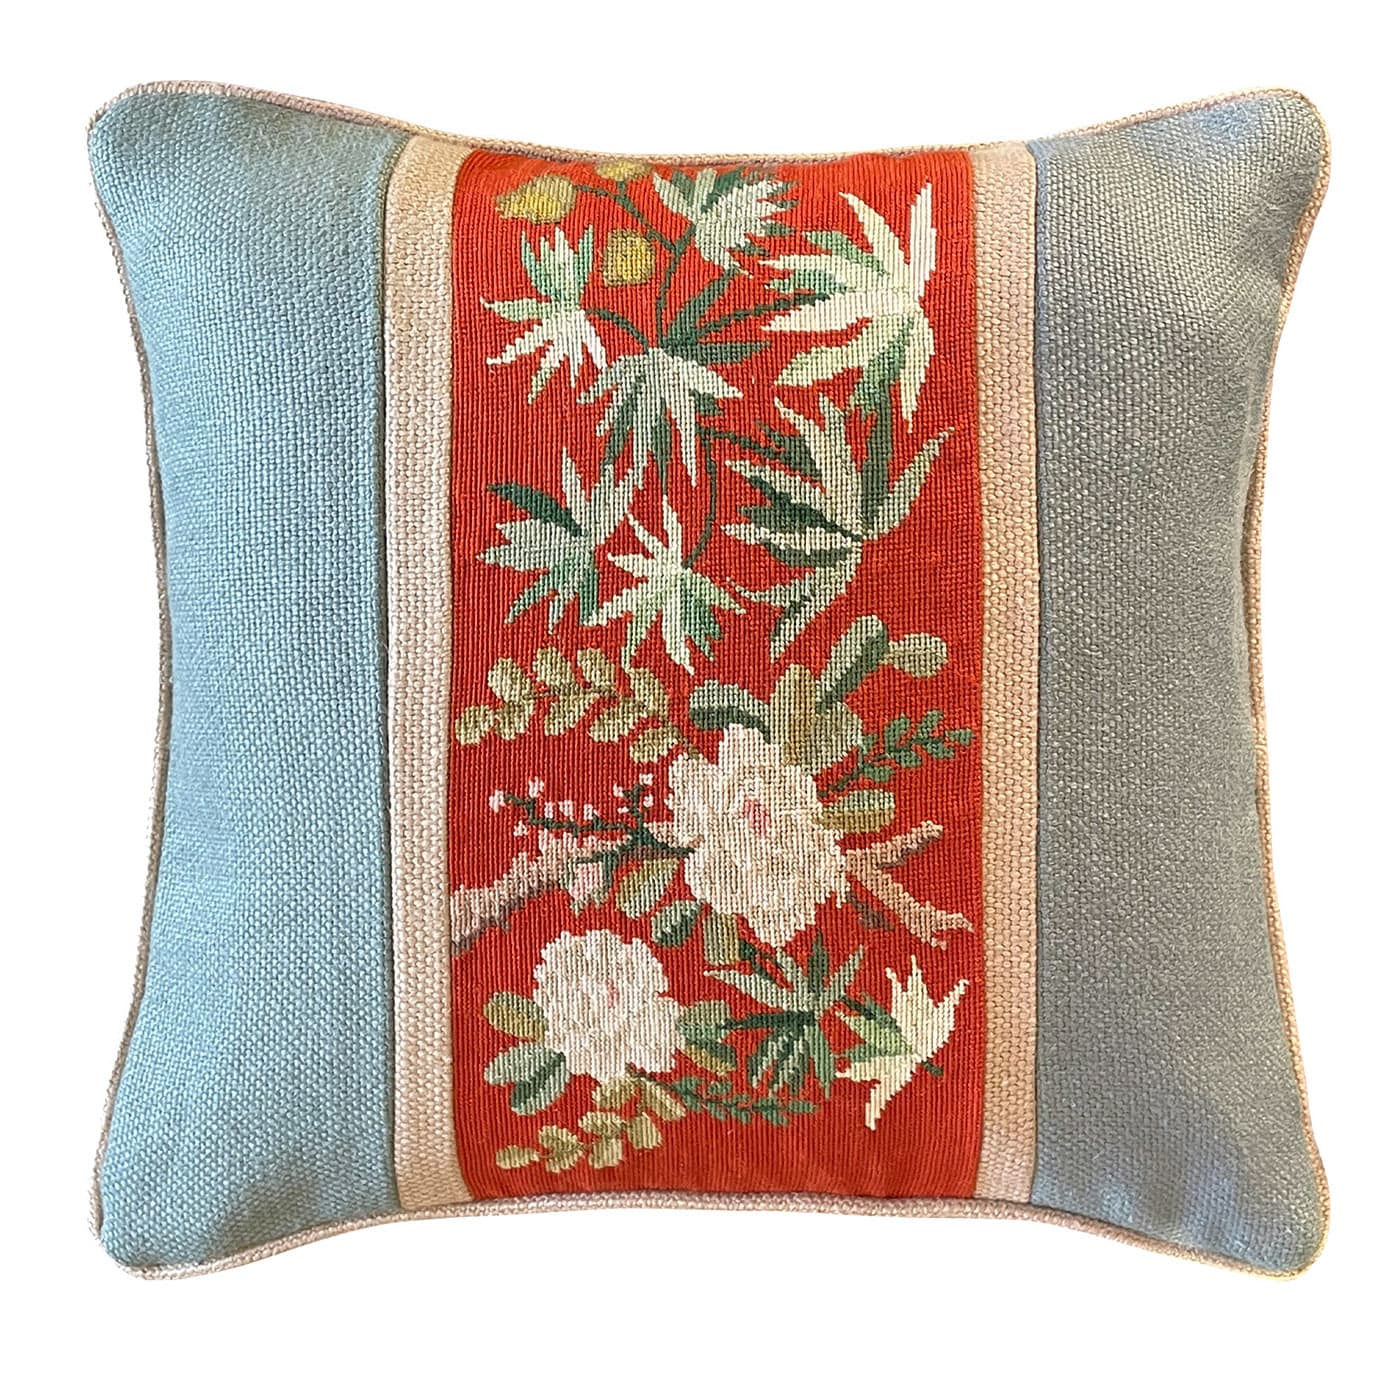 White Flowers and leaves Hand-Embroidered square cushion - Midsummer Milano